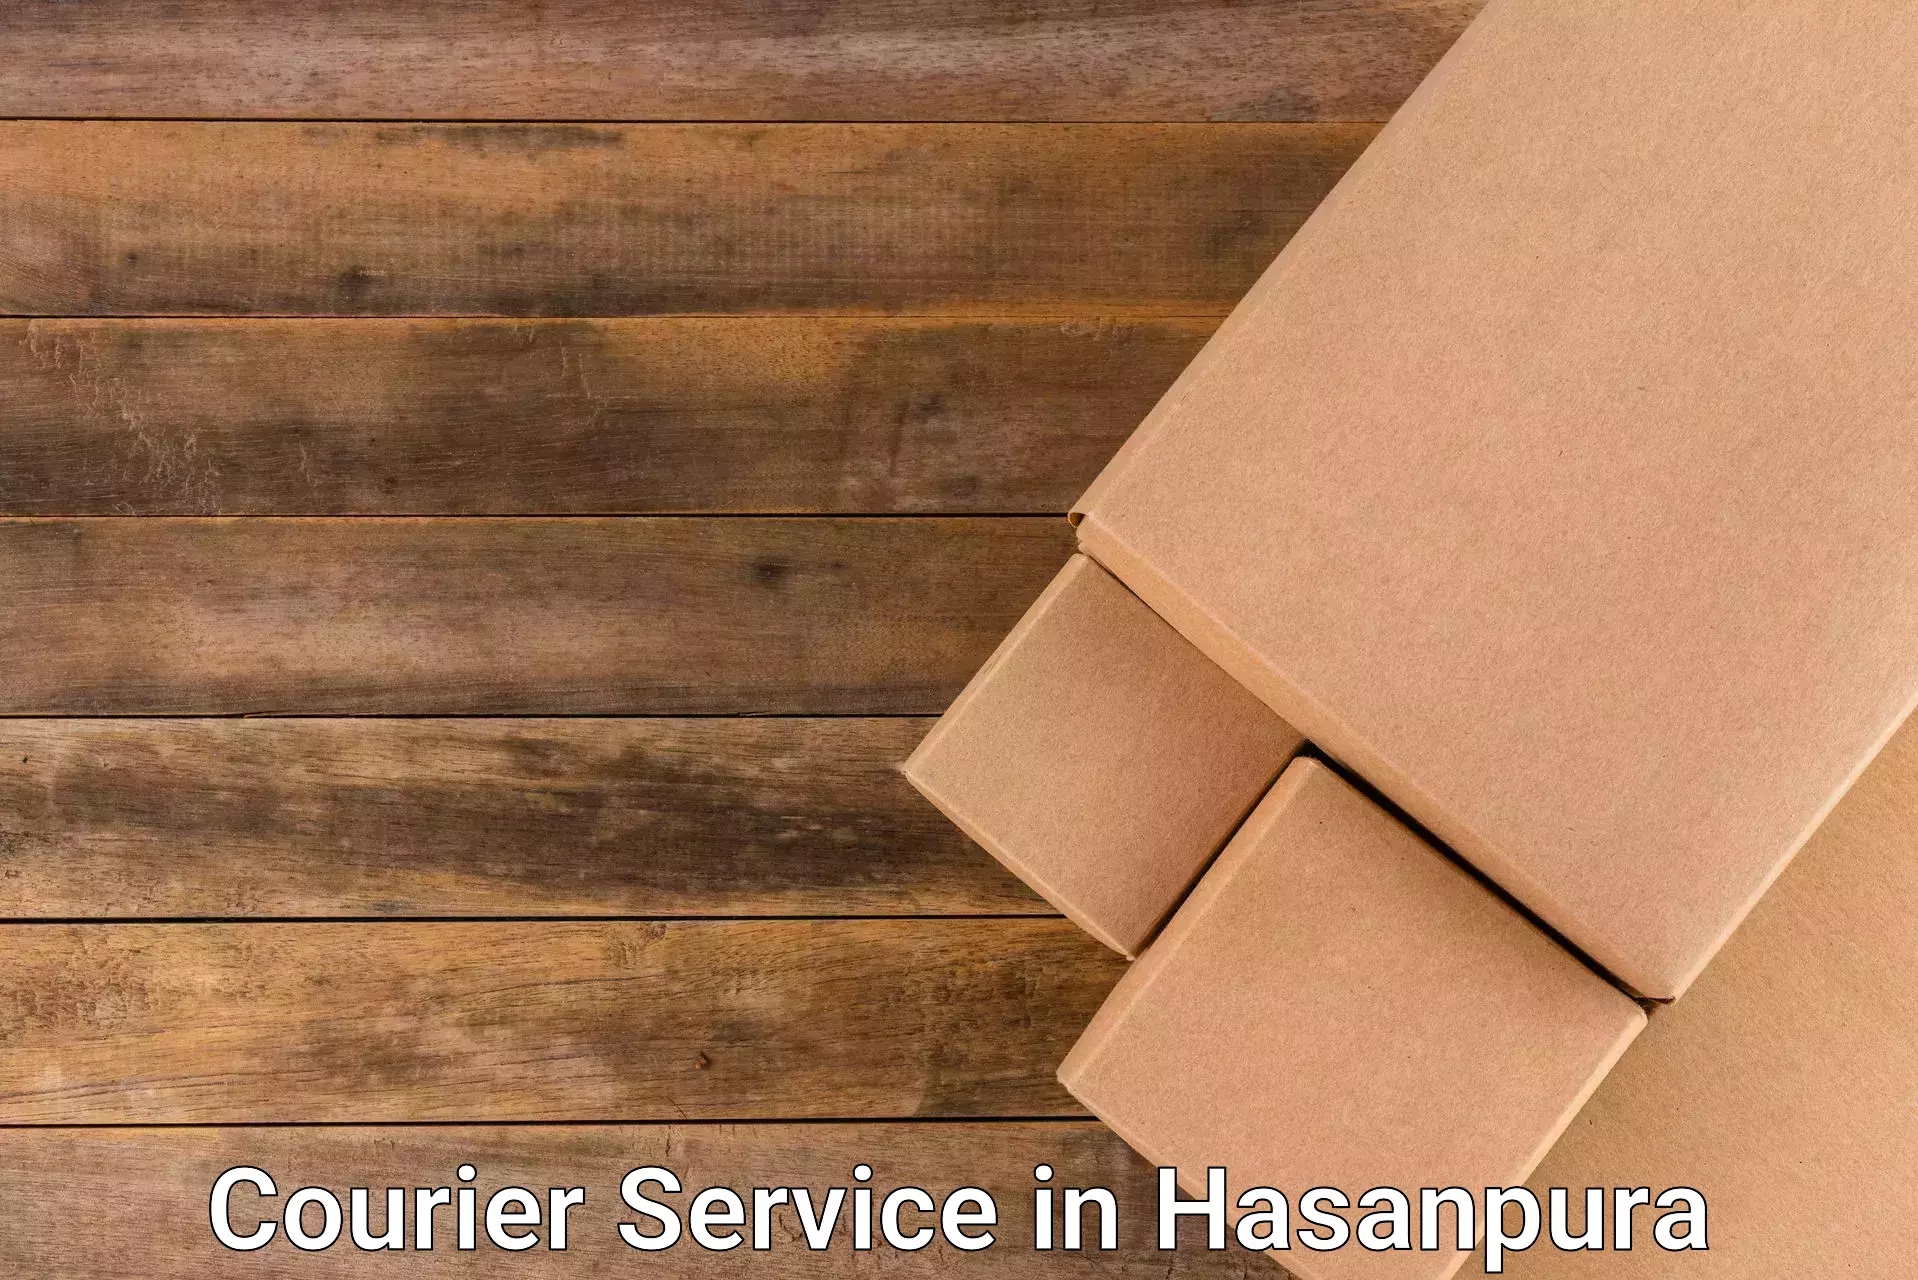 Reliable courier services in Hasanpura